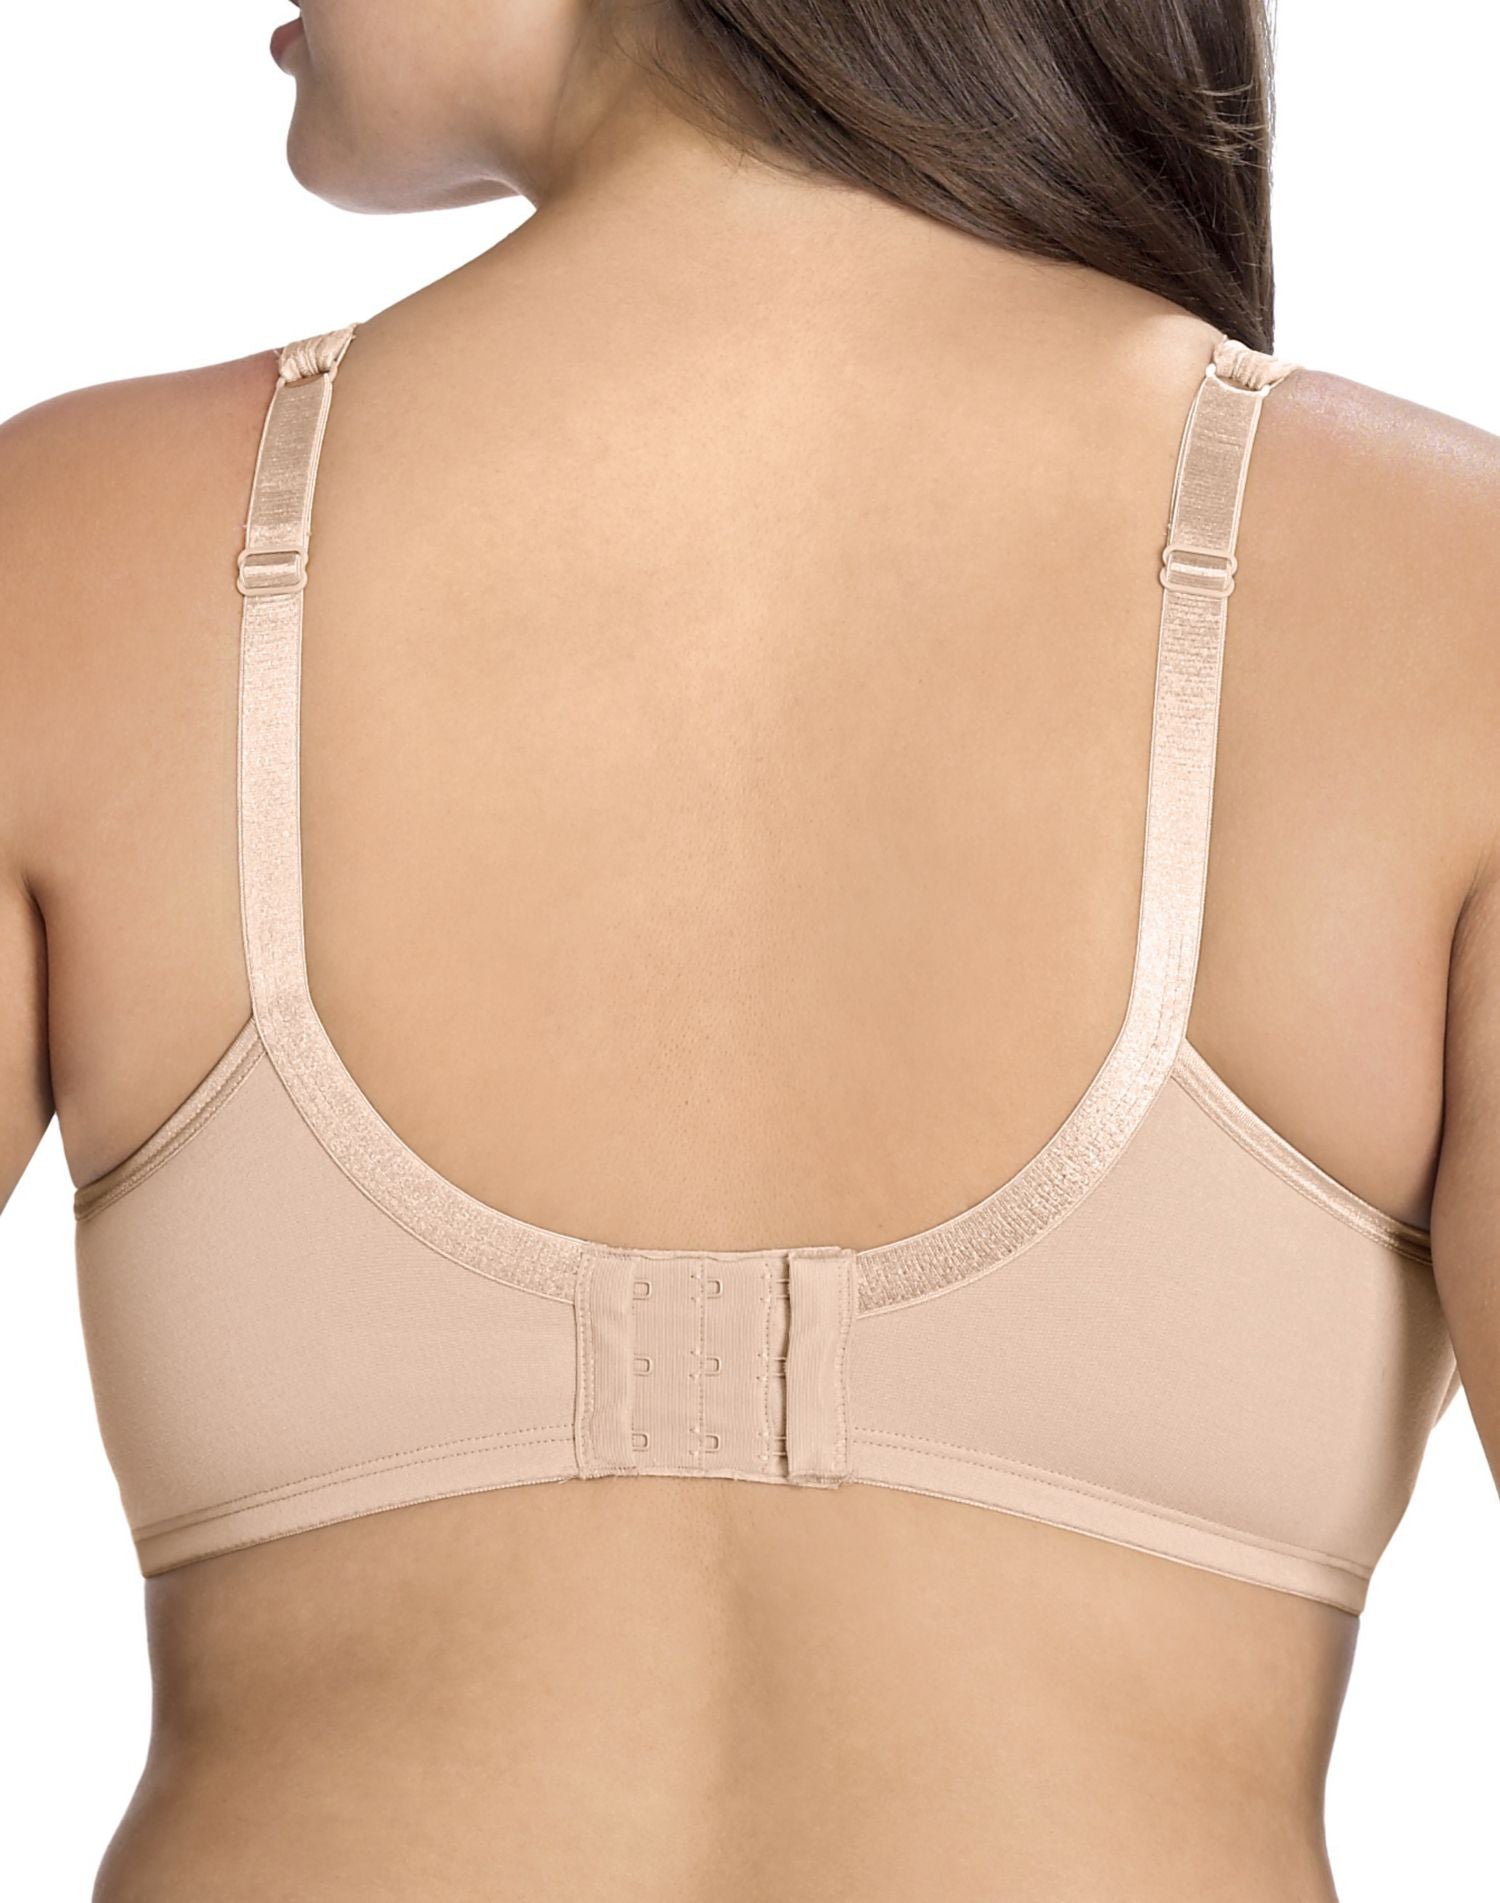 7523 - Playtex All Over Support Seamless Cotton Underwire Bra